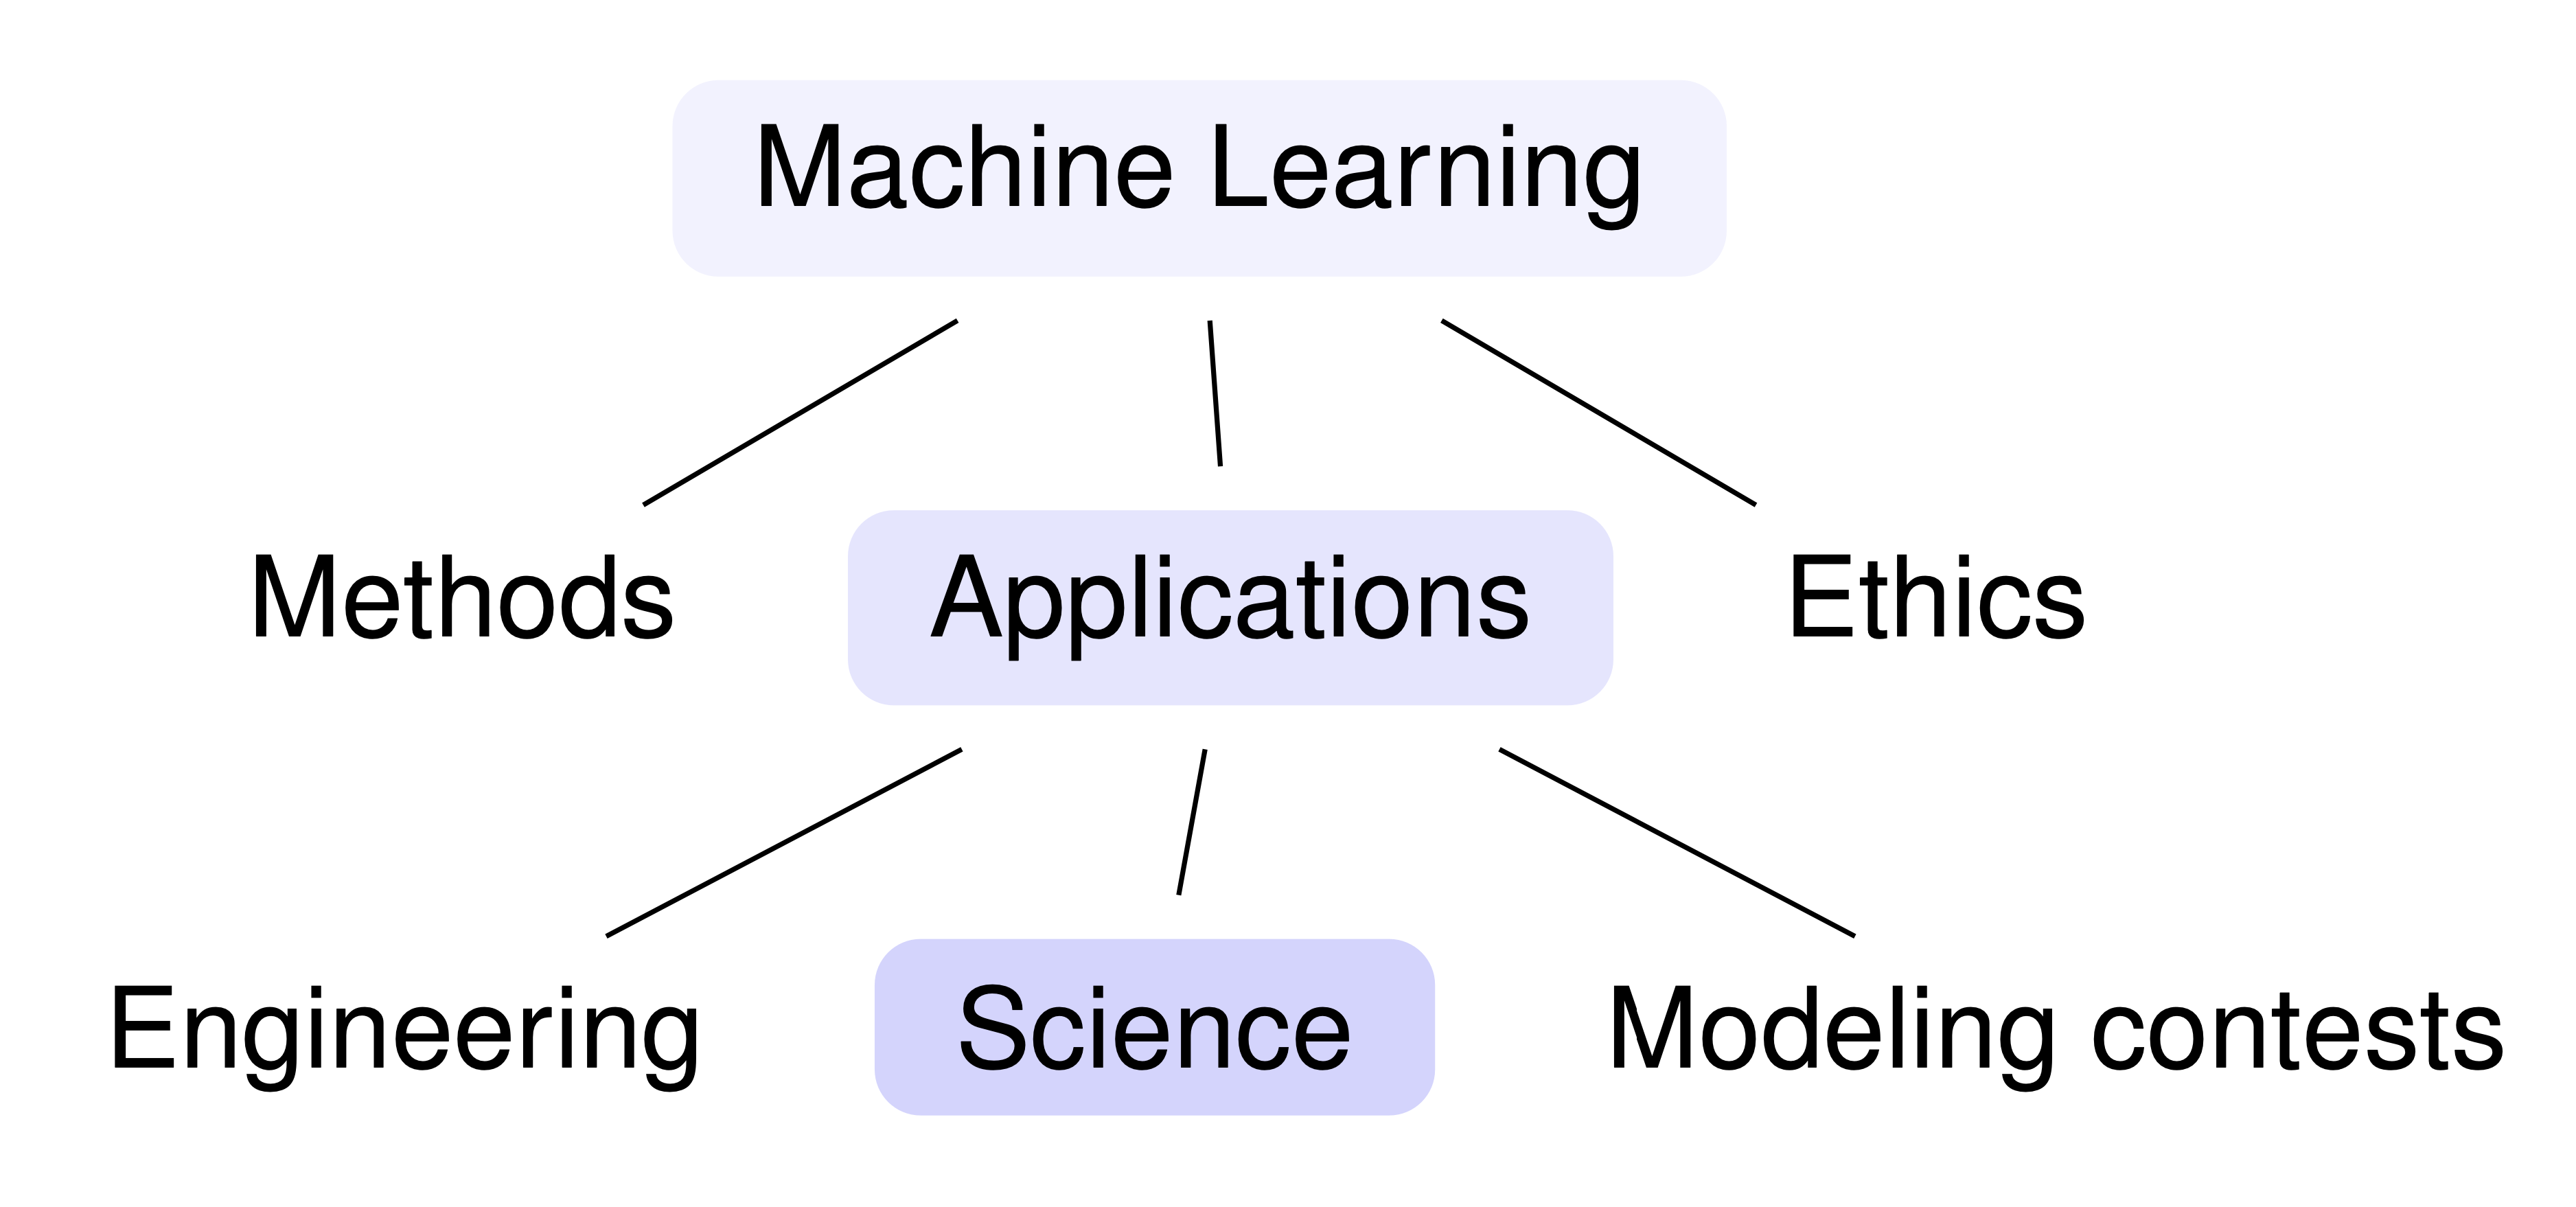 Various domains in which ML methods are used. In our work, we focus on ML-based science.